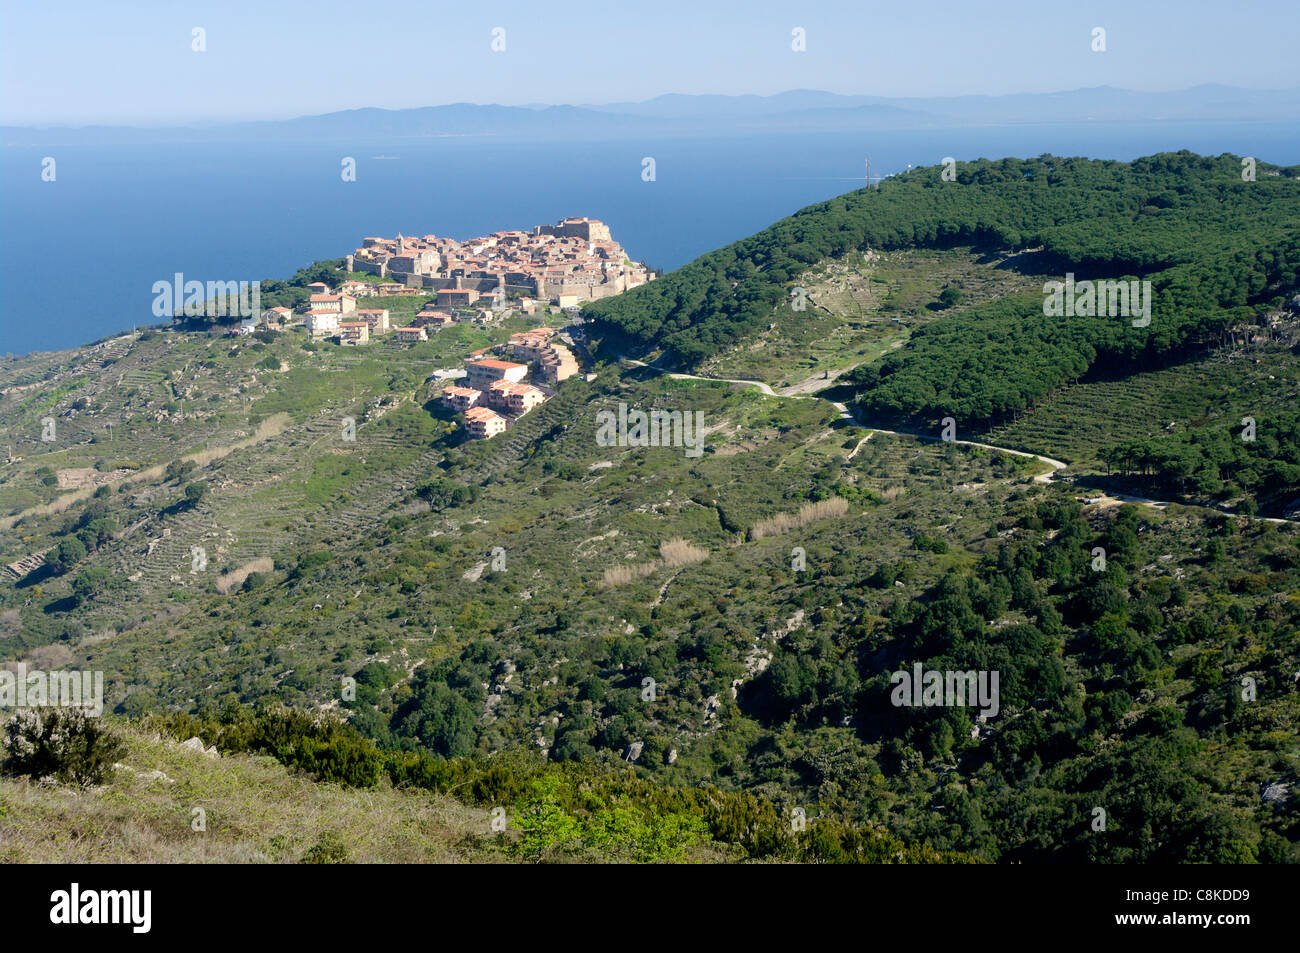 View of the Castle at Isola del Giglio, Tuscany, Italy Stock Photo